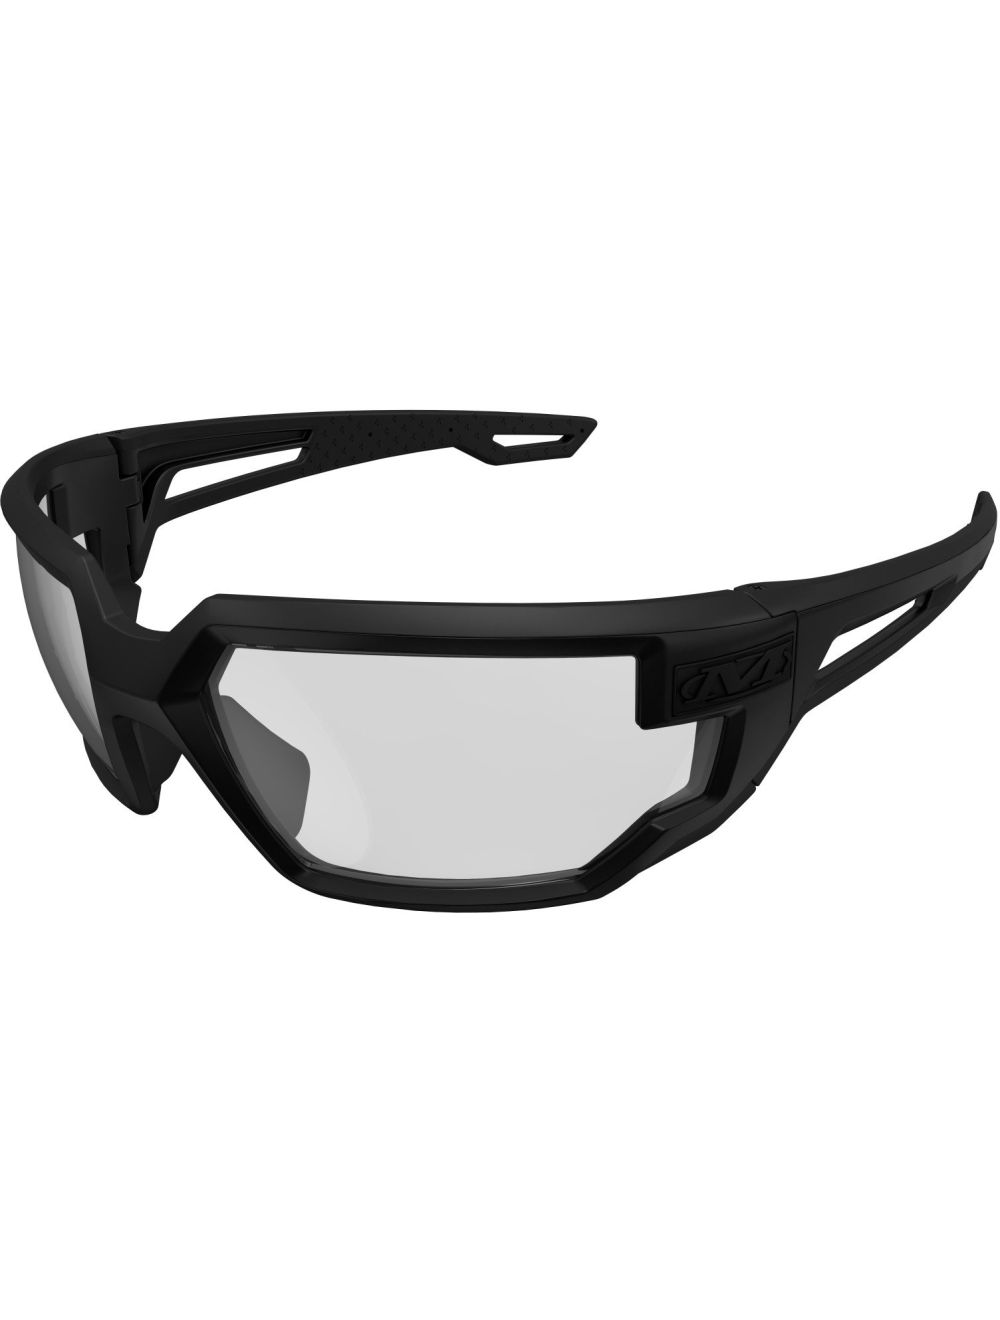 Tactical Type-X - Black Frame w/ Clear Lens